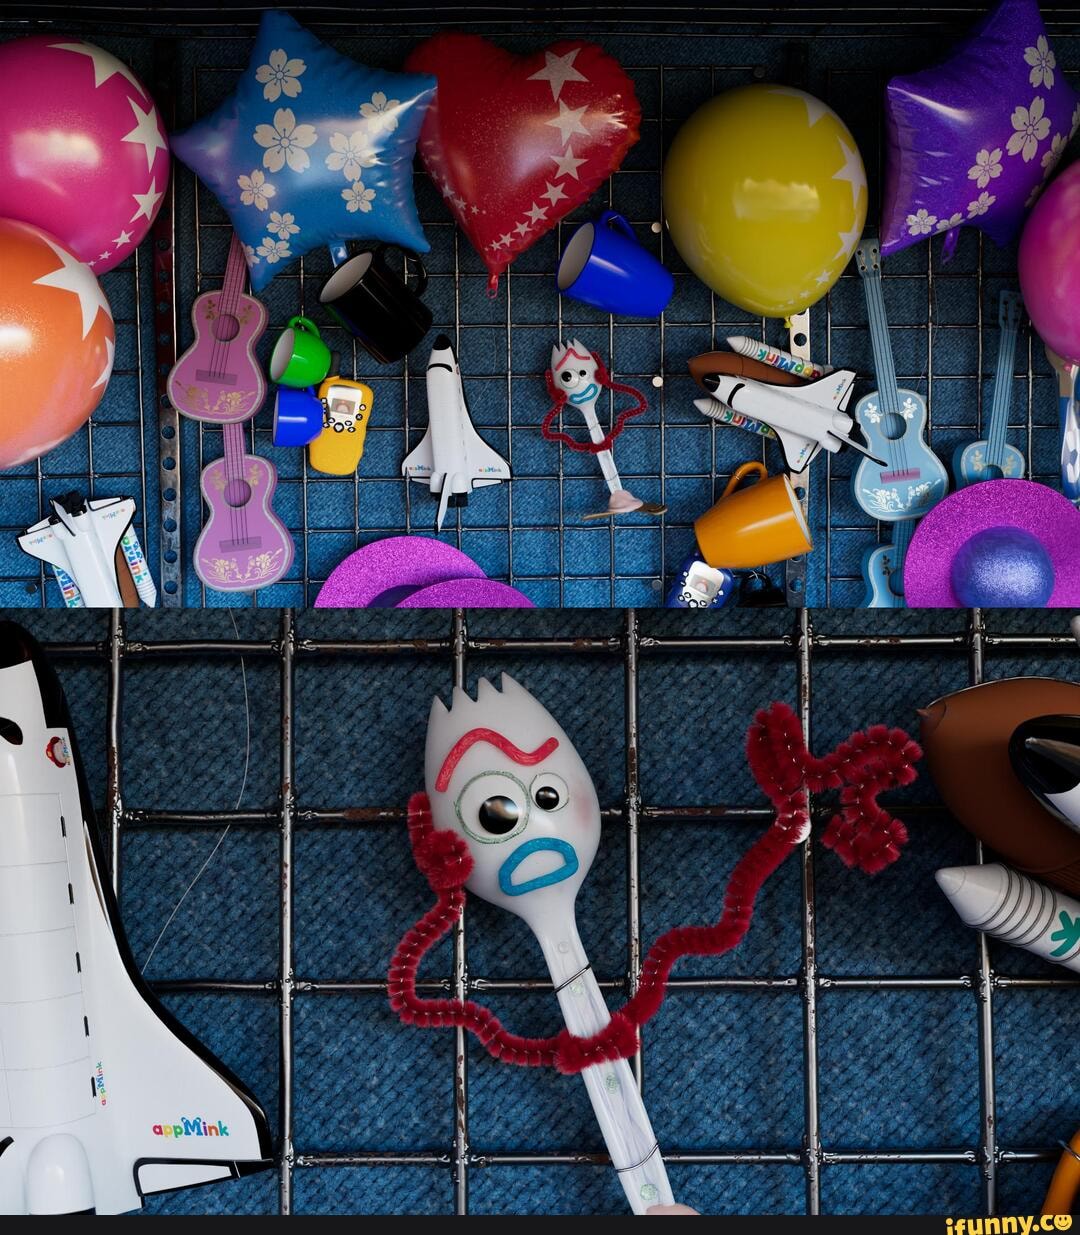 Forky, Toy Story 4's New Character, is Already a Meme